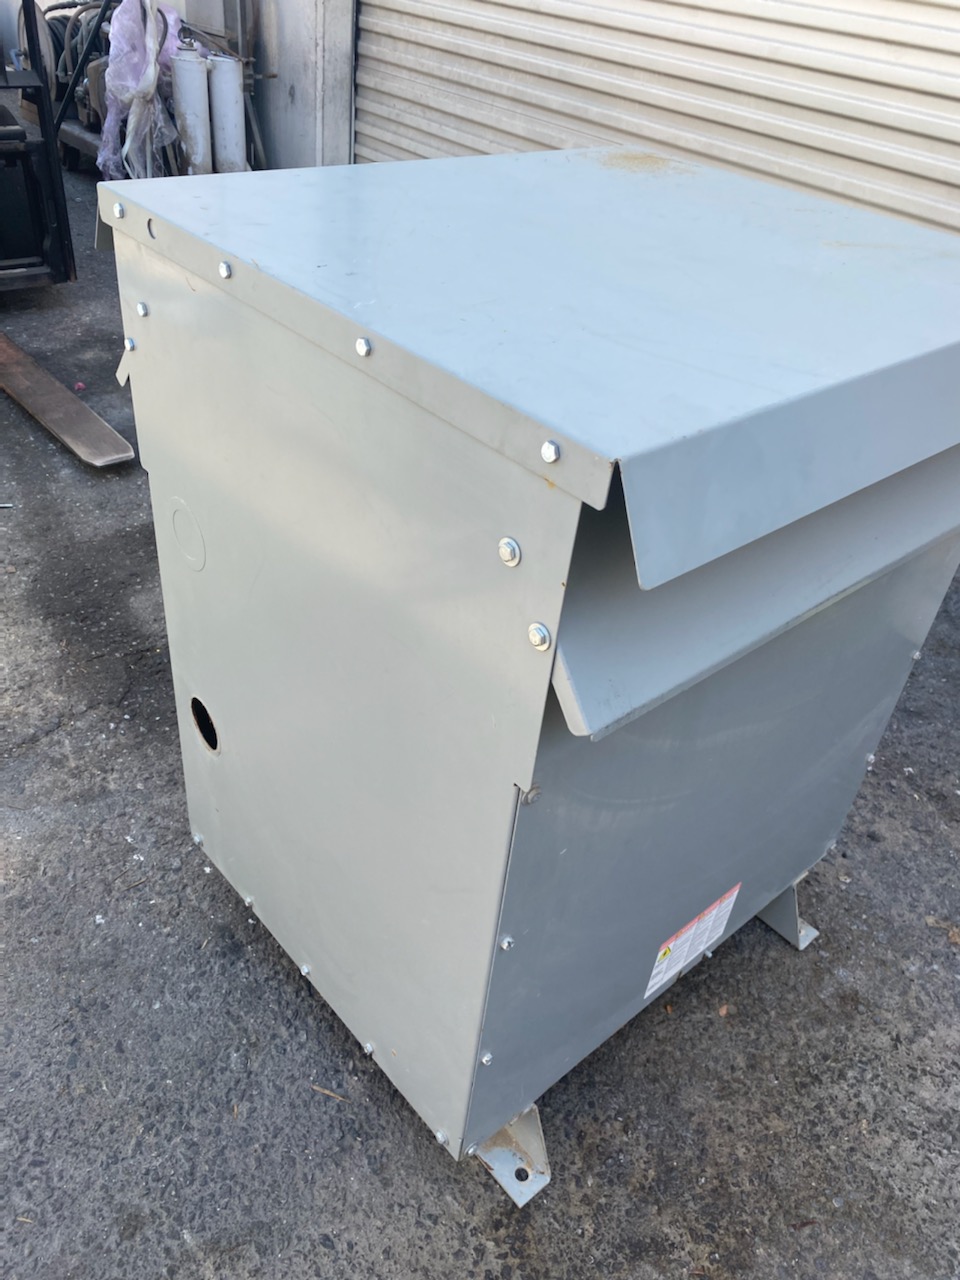 Sell Pad Mounted Transformers Near Austin